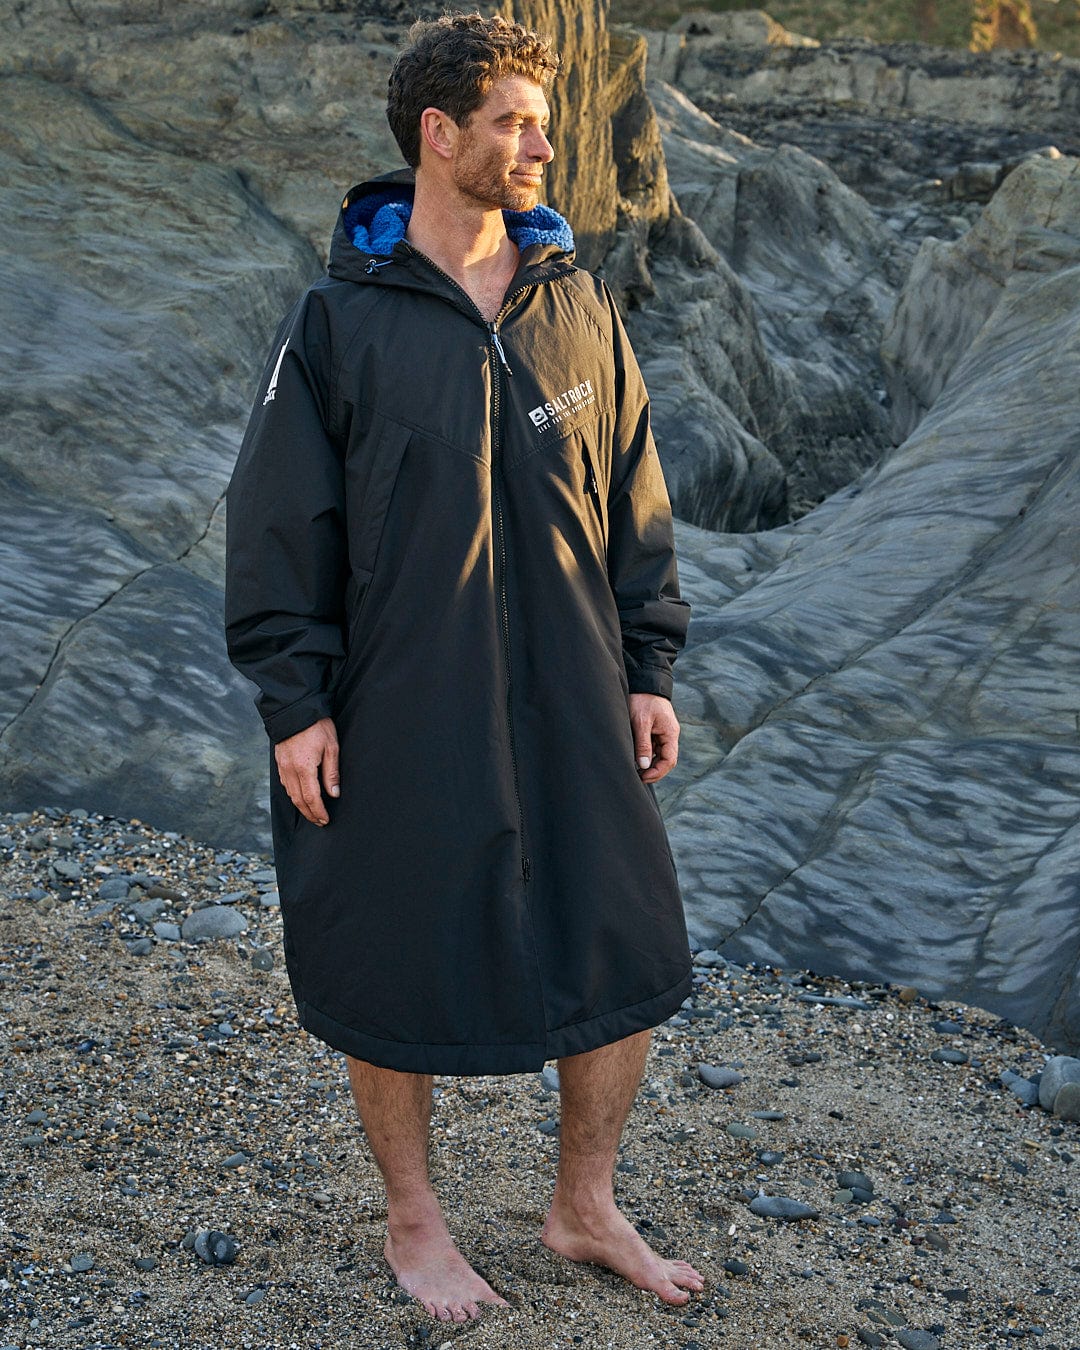 A man in a Saltrock black hooded coat, the Four Seasons Waterproof Changing Robe in Black/Blue, standing on a rocky beach.